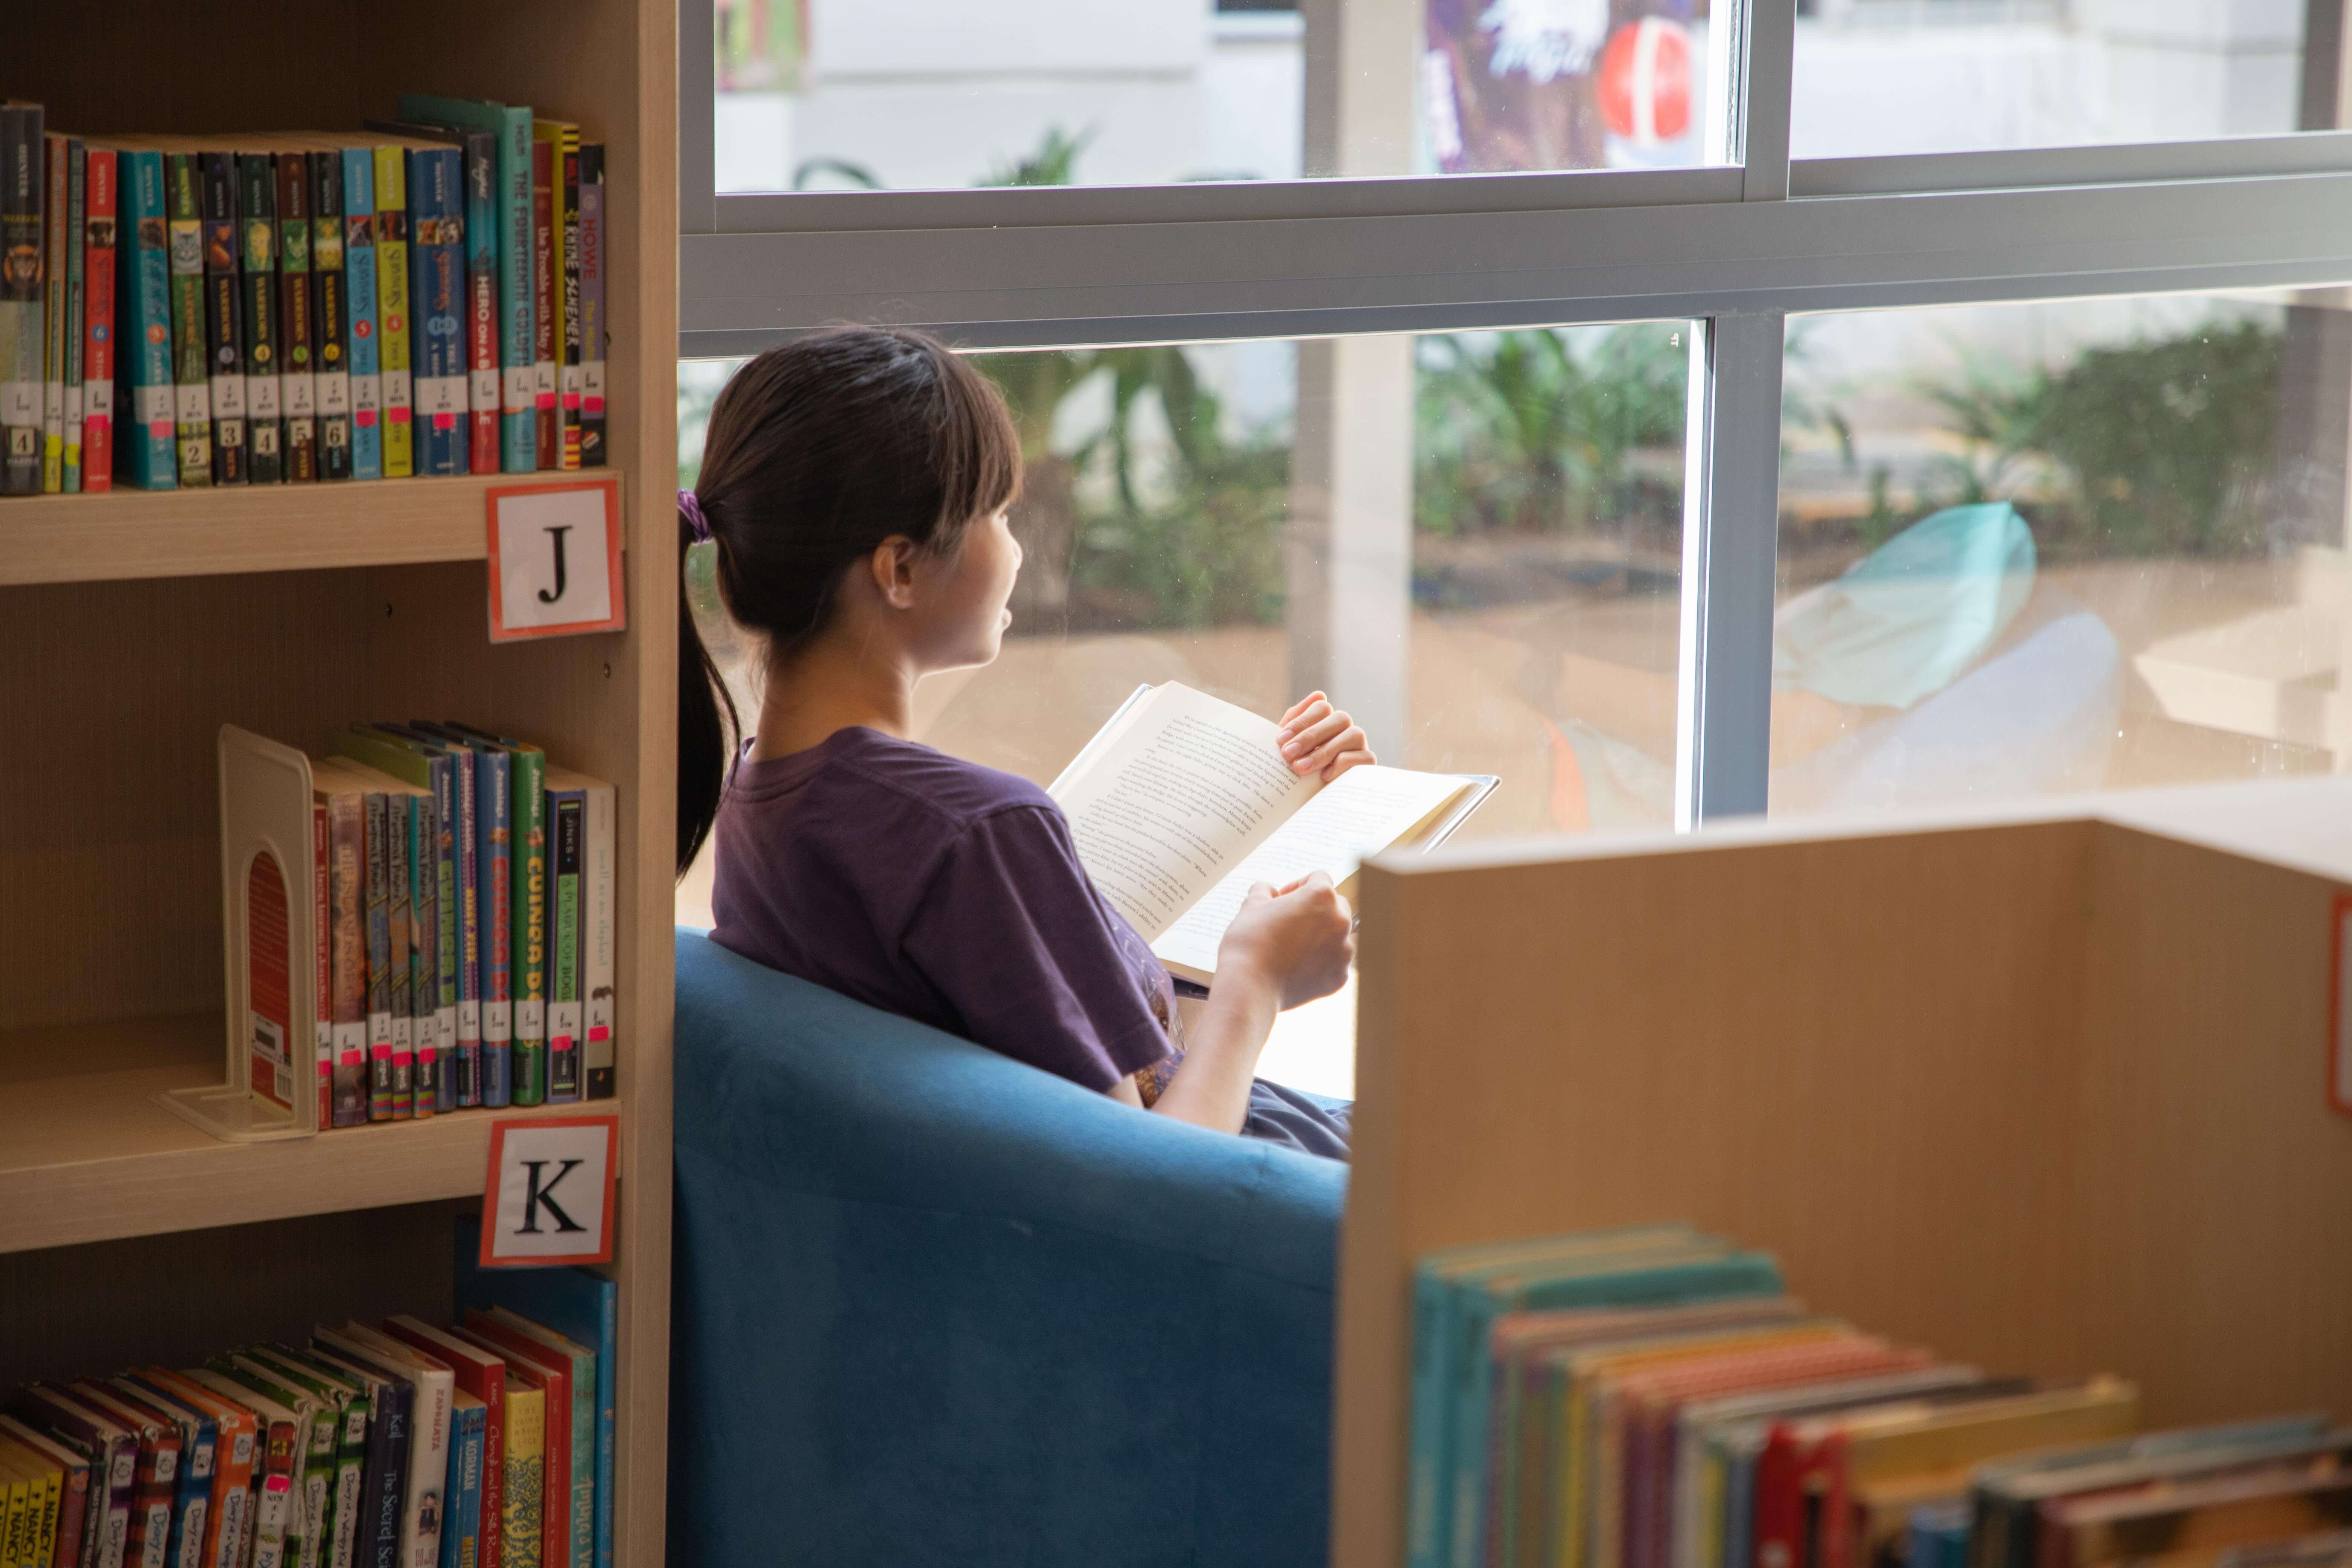 Want to improve your language skills at Northbridge? Then you need to read, read, read-want-to-improve-your-language-skills-at-northbridge-then-you-need-to-read-read-read-Reading17010192